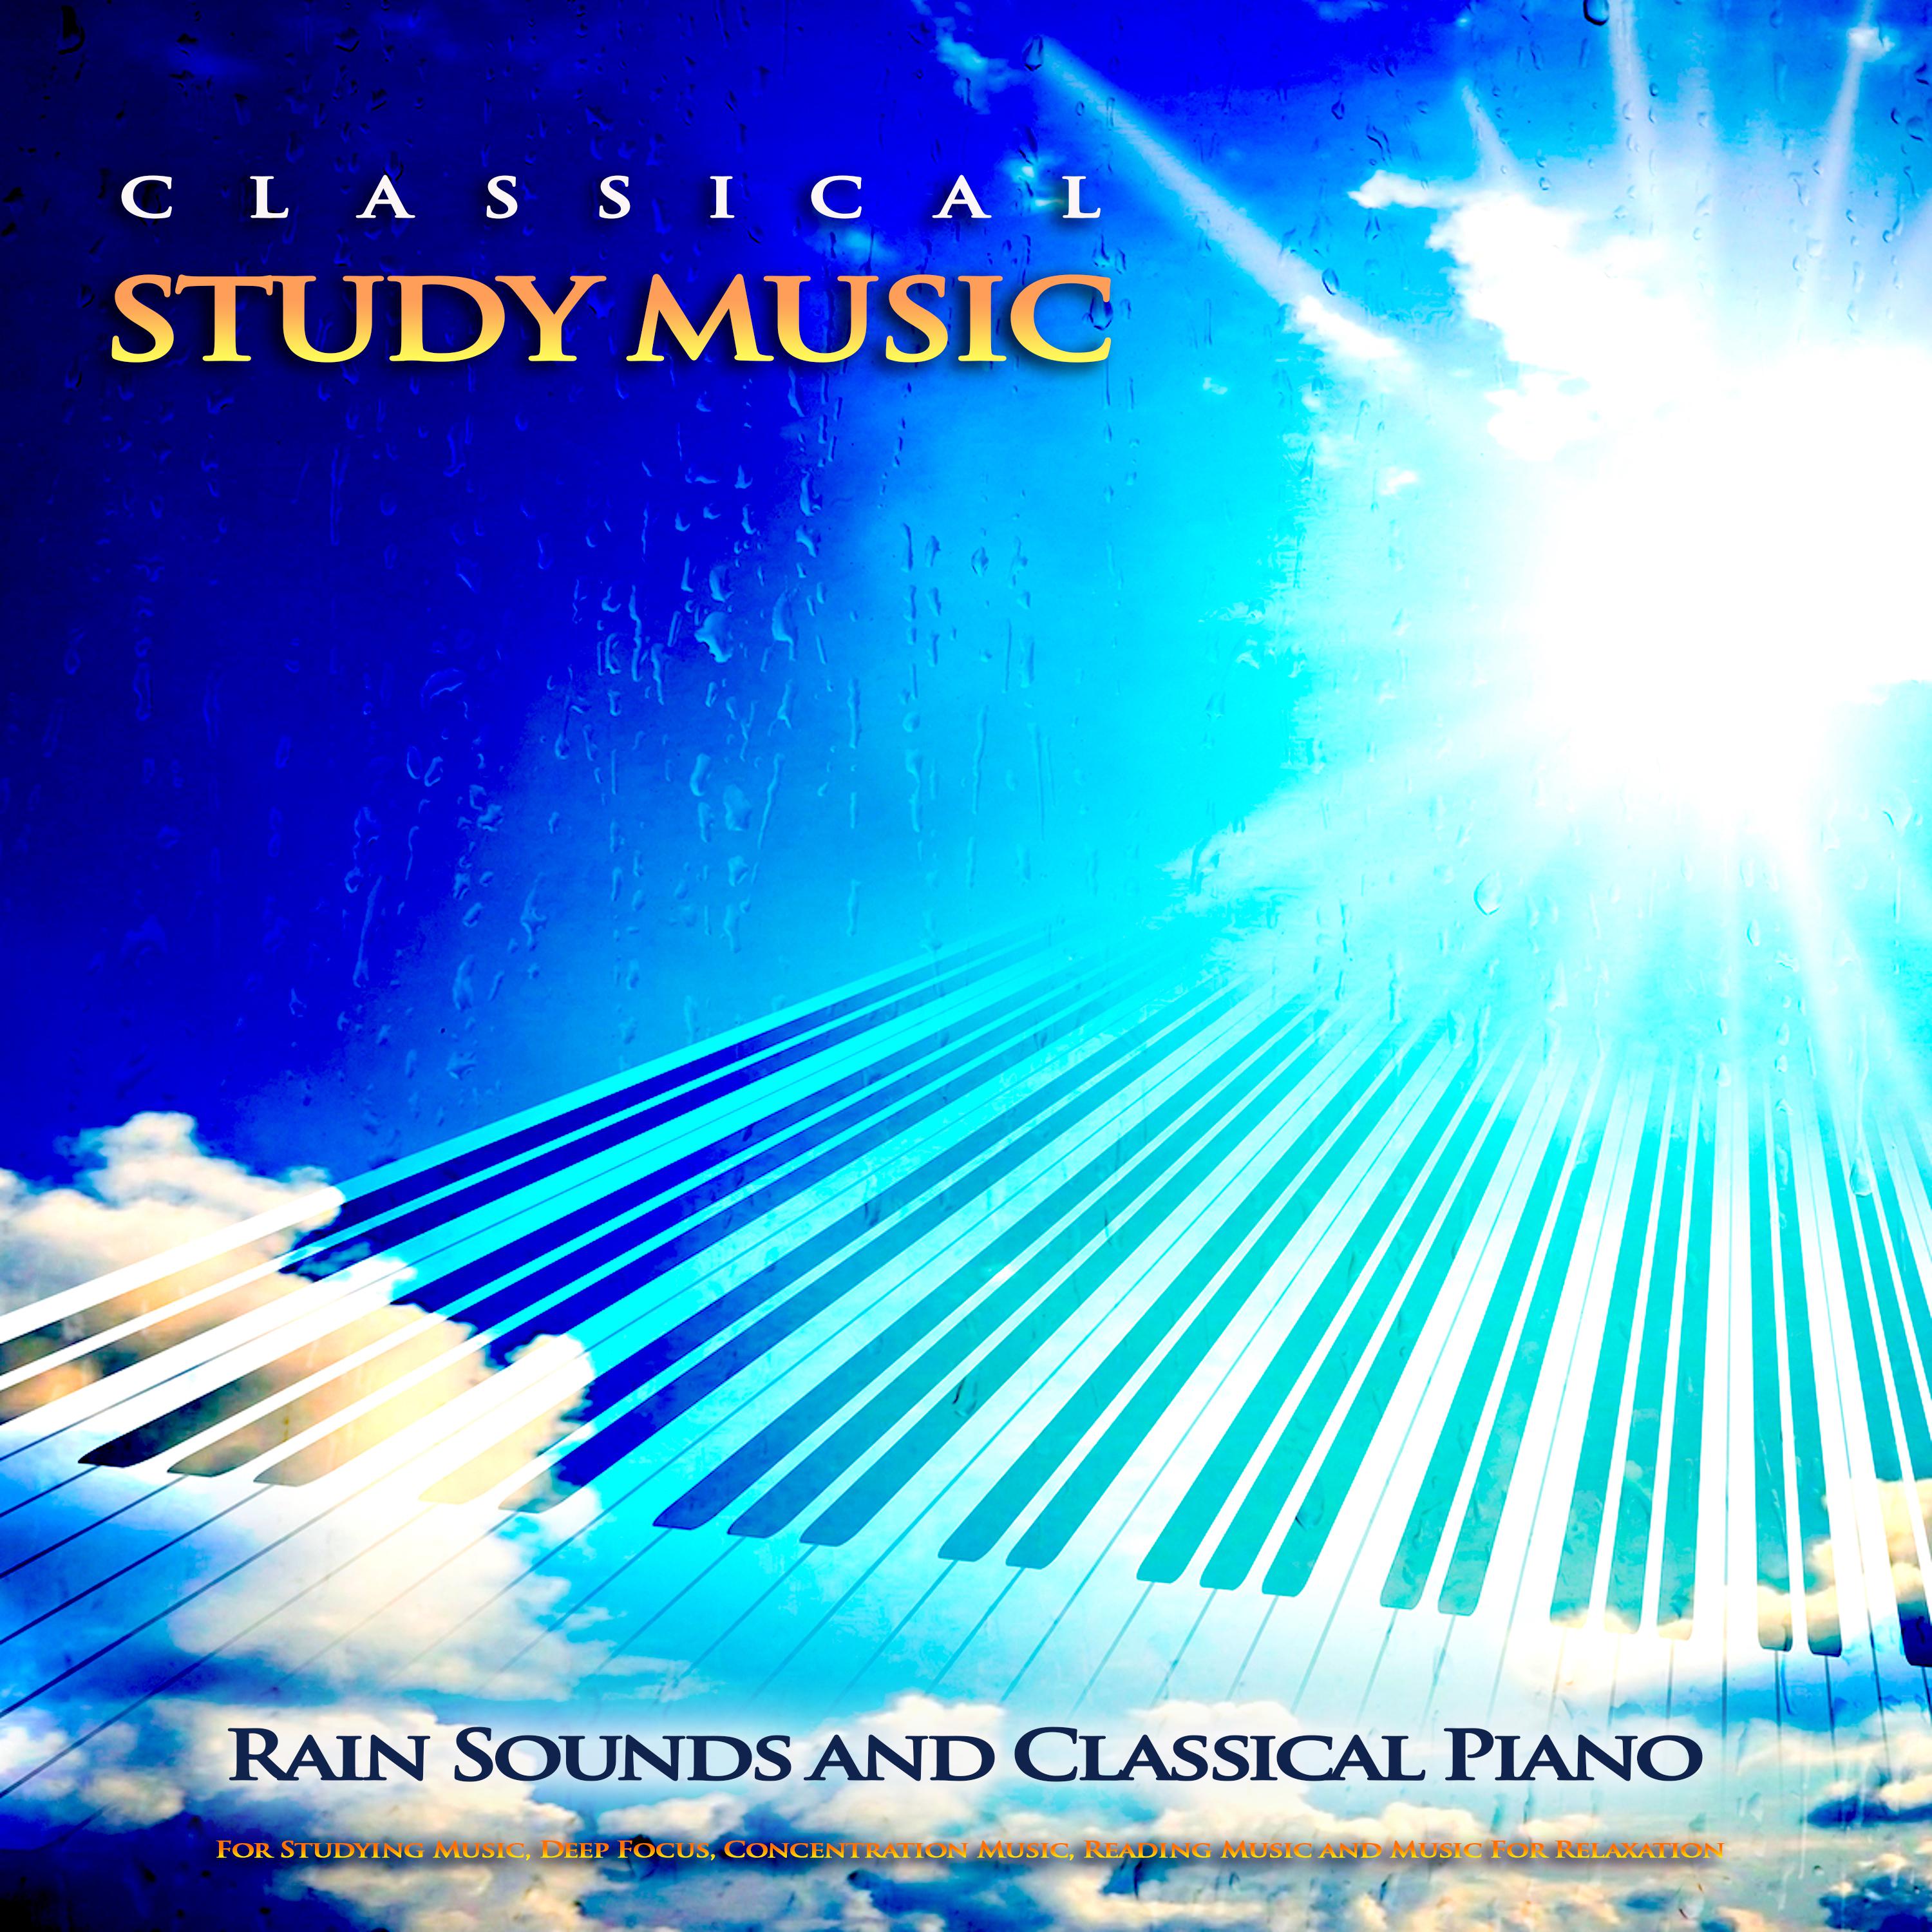 Song Without Words - Mendelssohn - Classical Piano Music and Rain Sounds - Classical Music For Studying